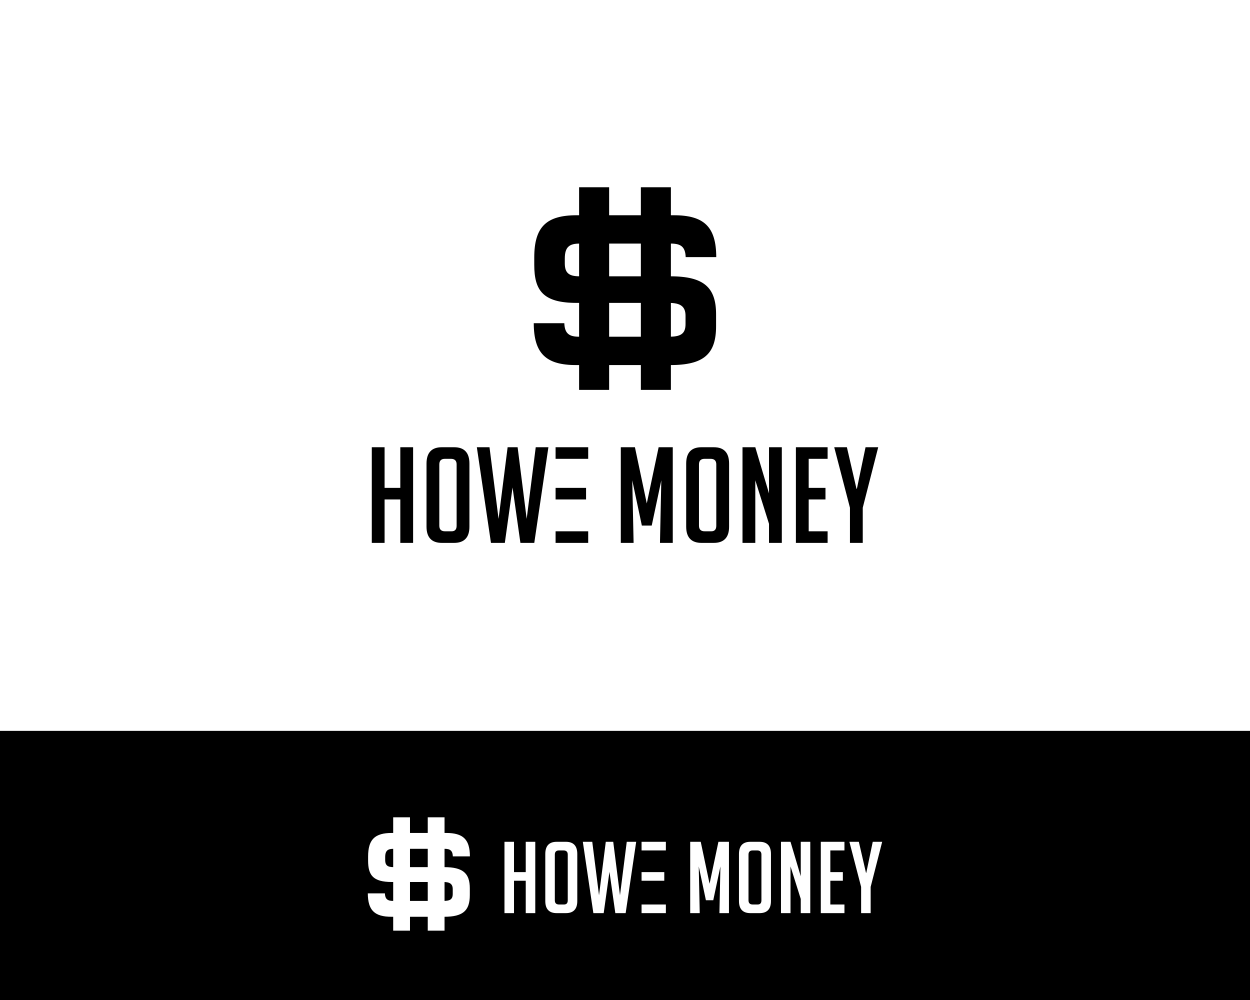 Need Money Logo - Logo Design for Howe Money, we can also try H$ or HM. If you do just